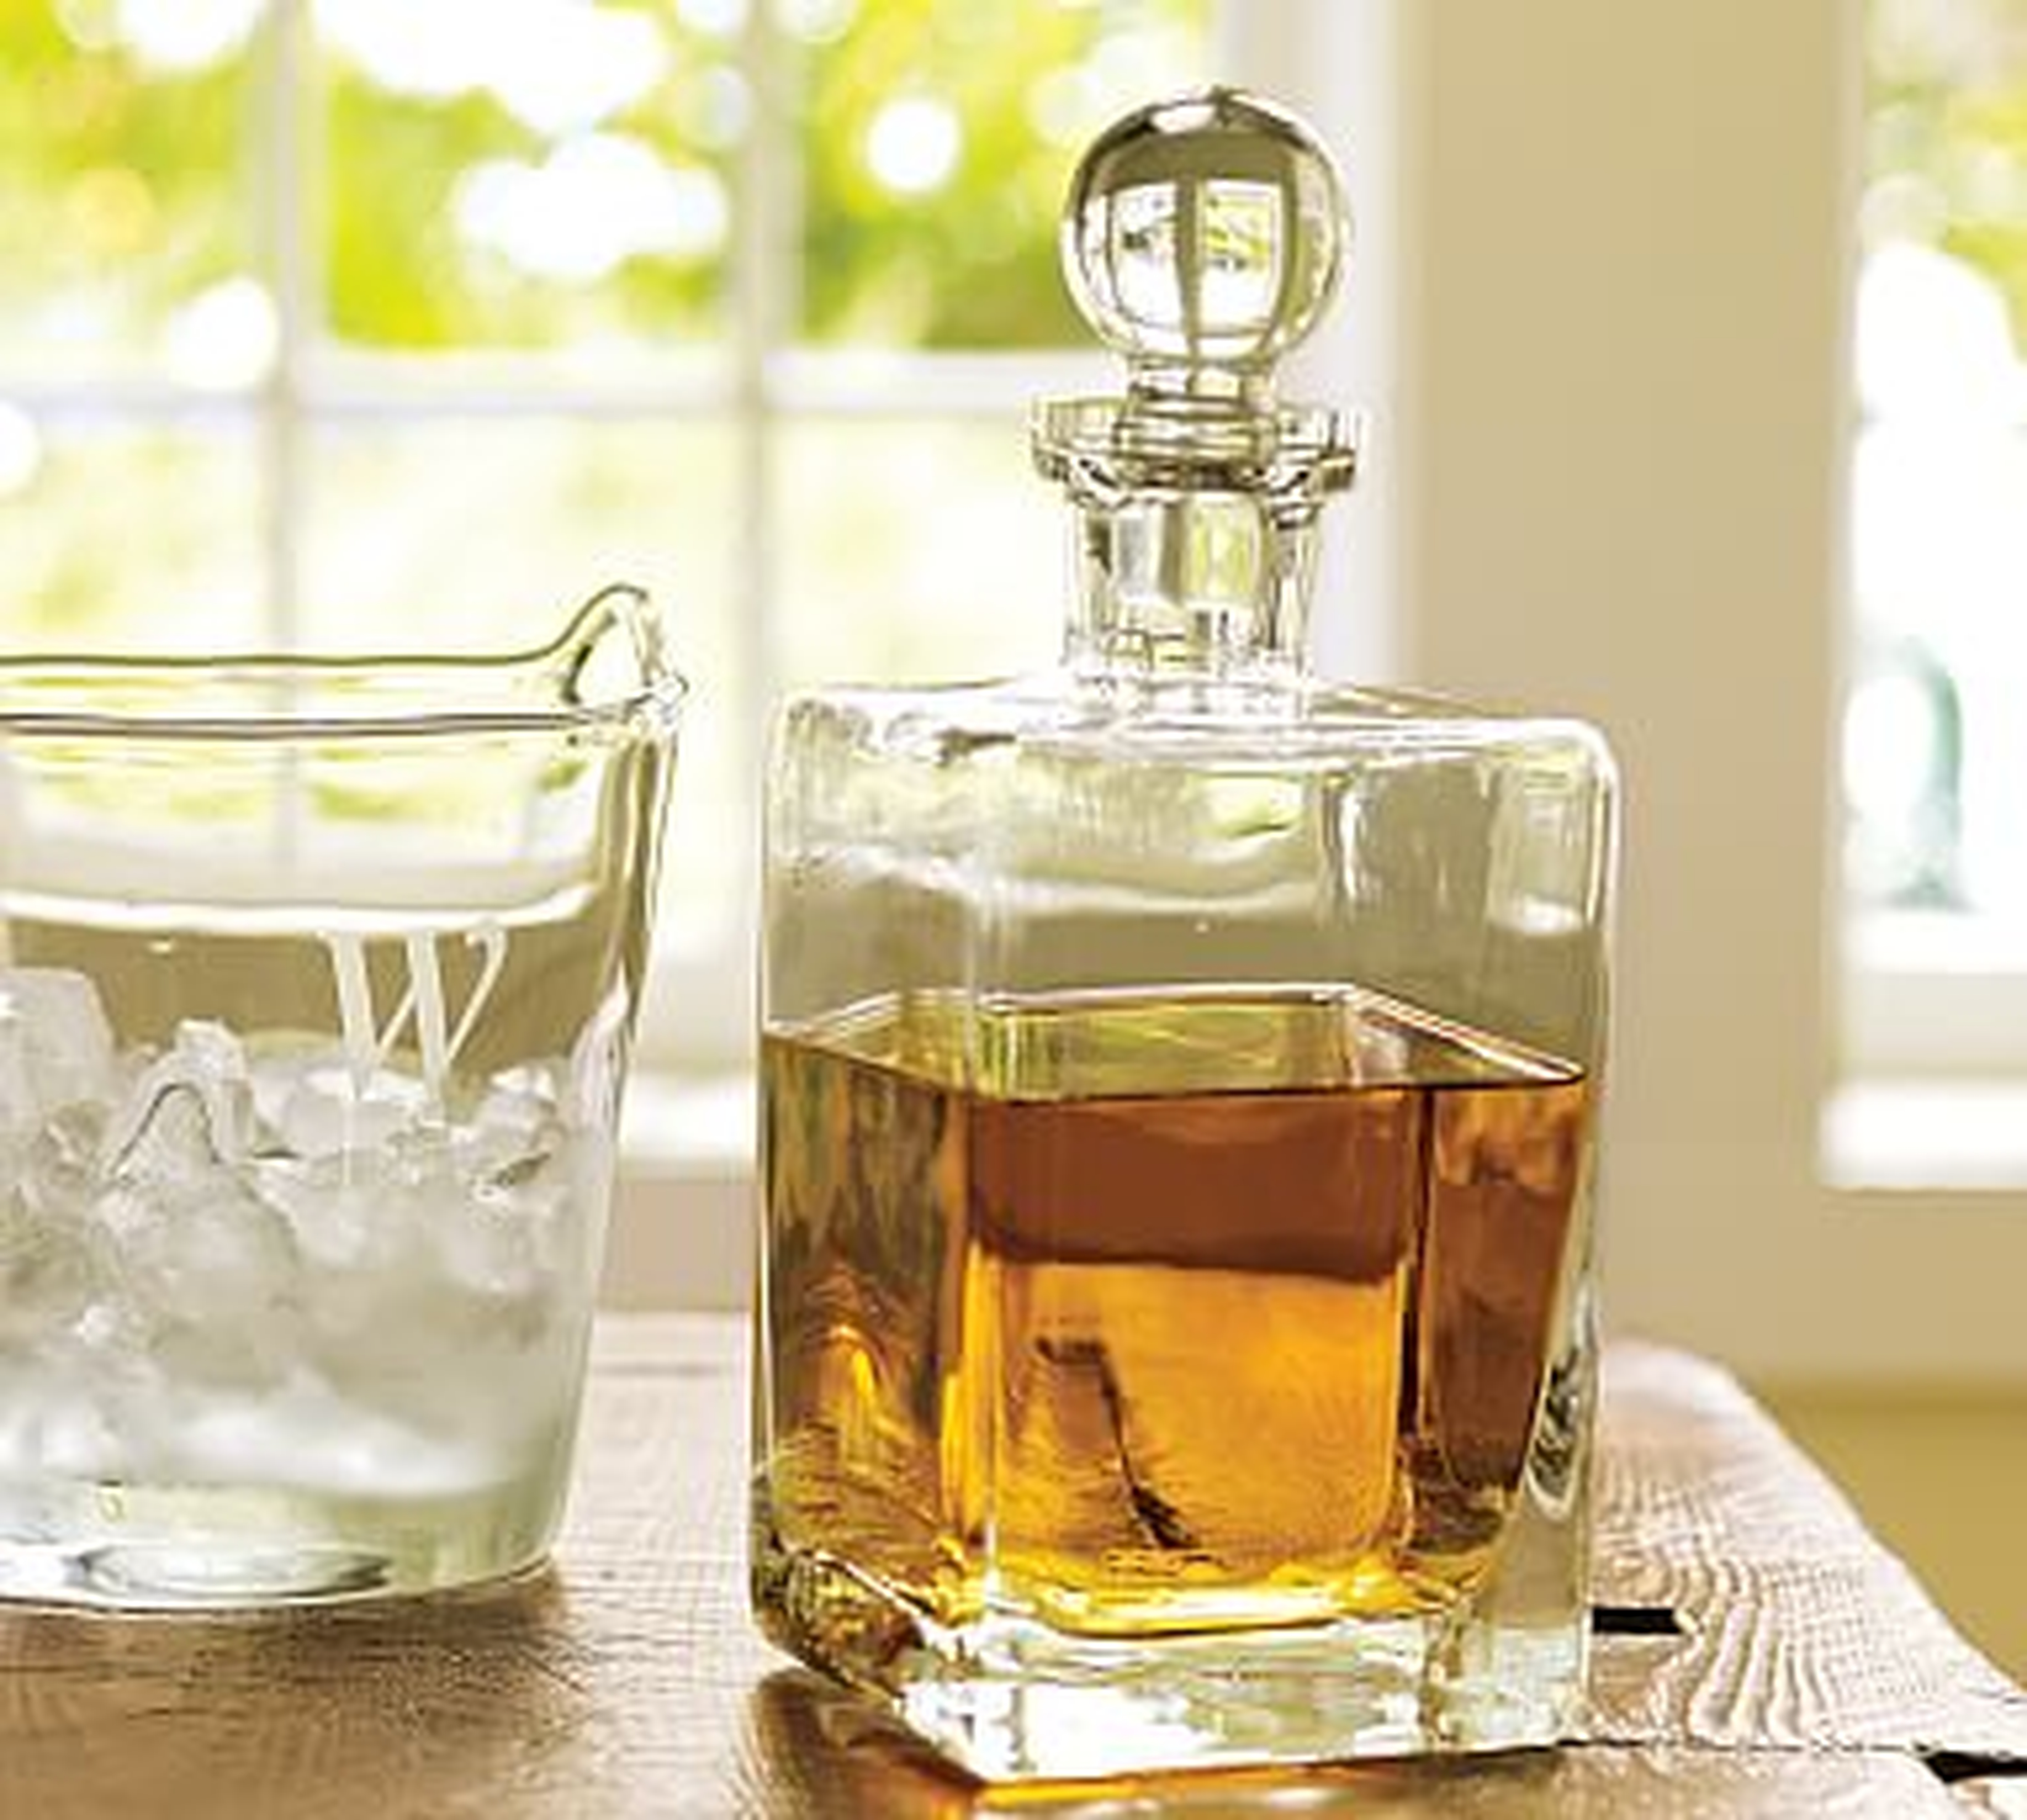 Square Hand-Blown Glass Decanter - Pottery Barn